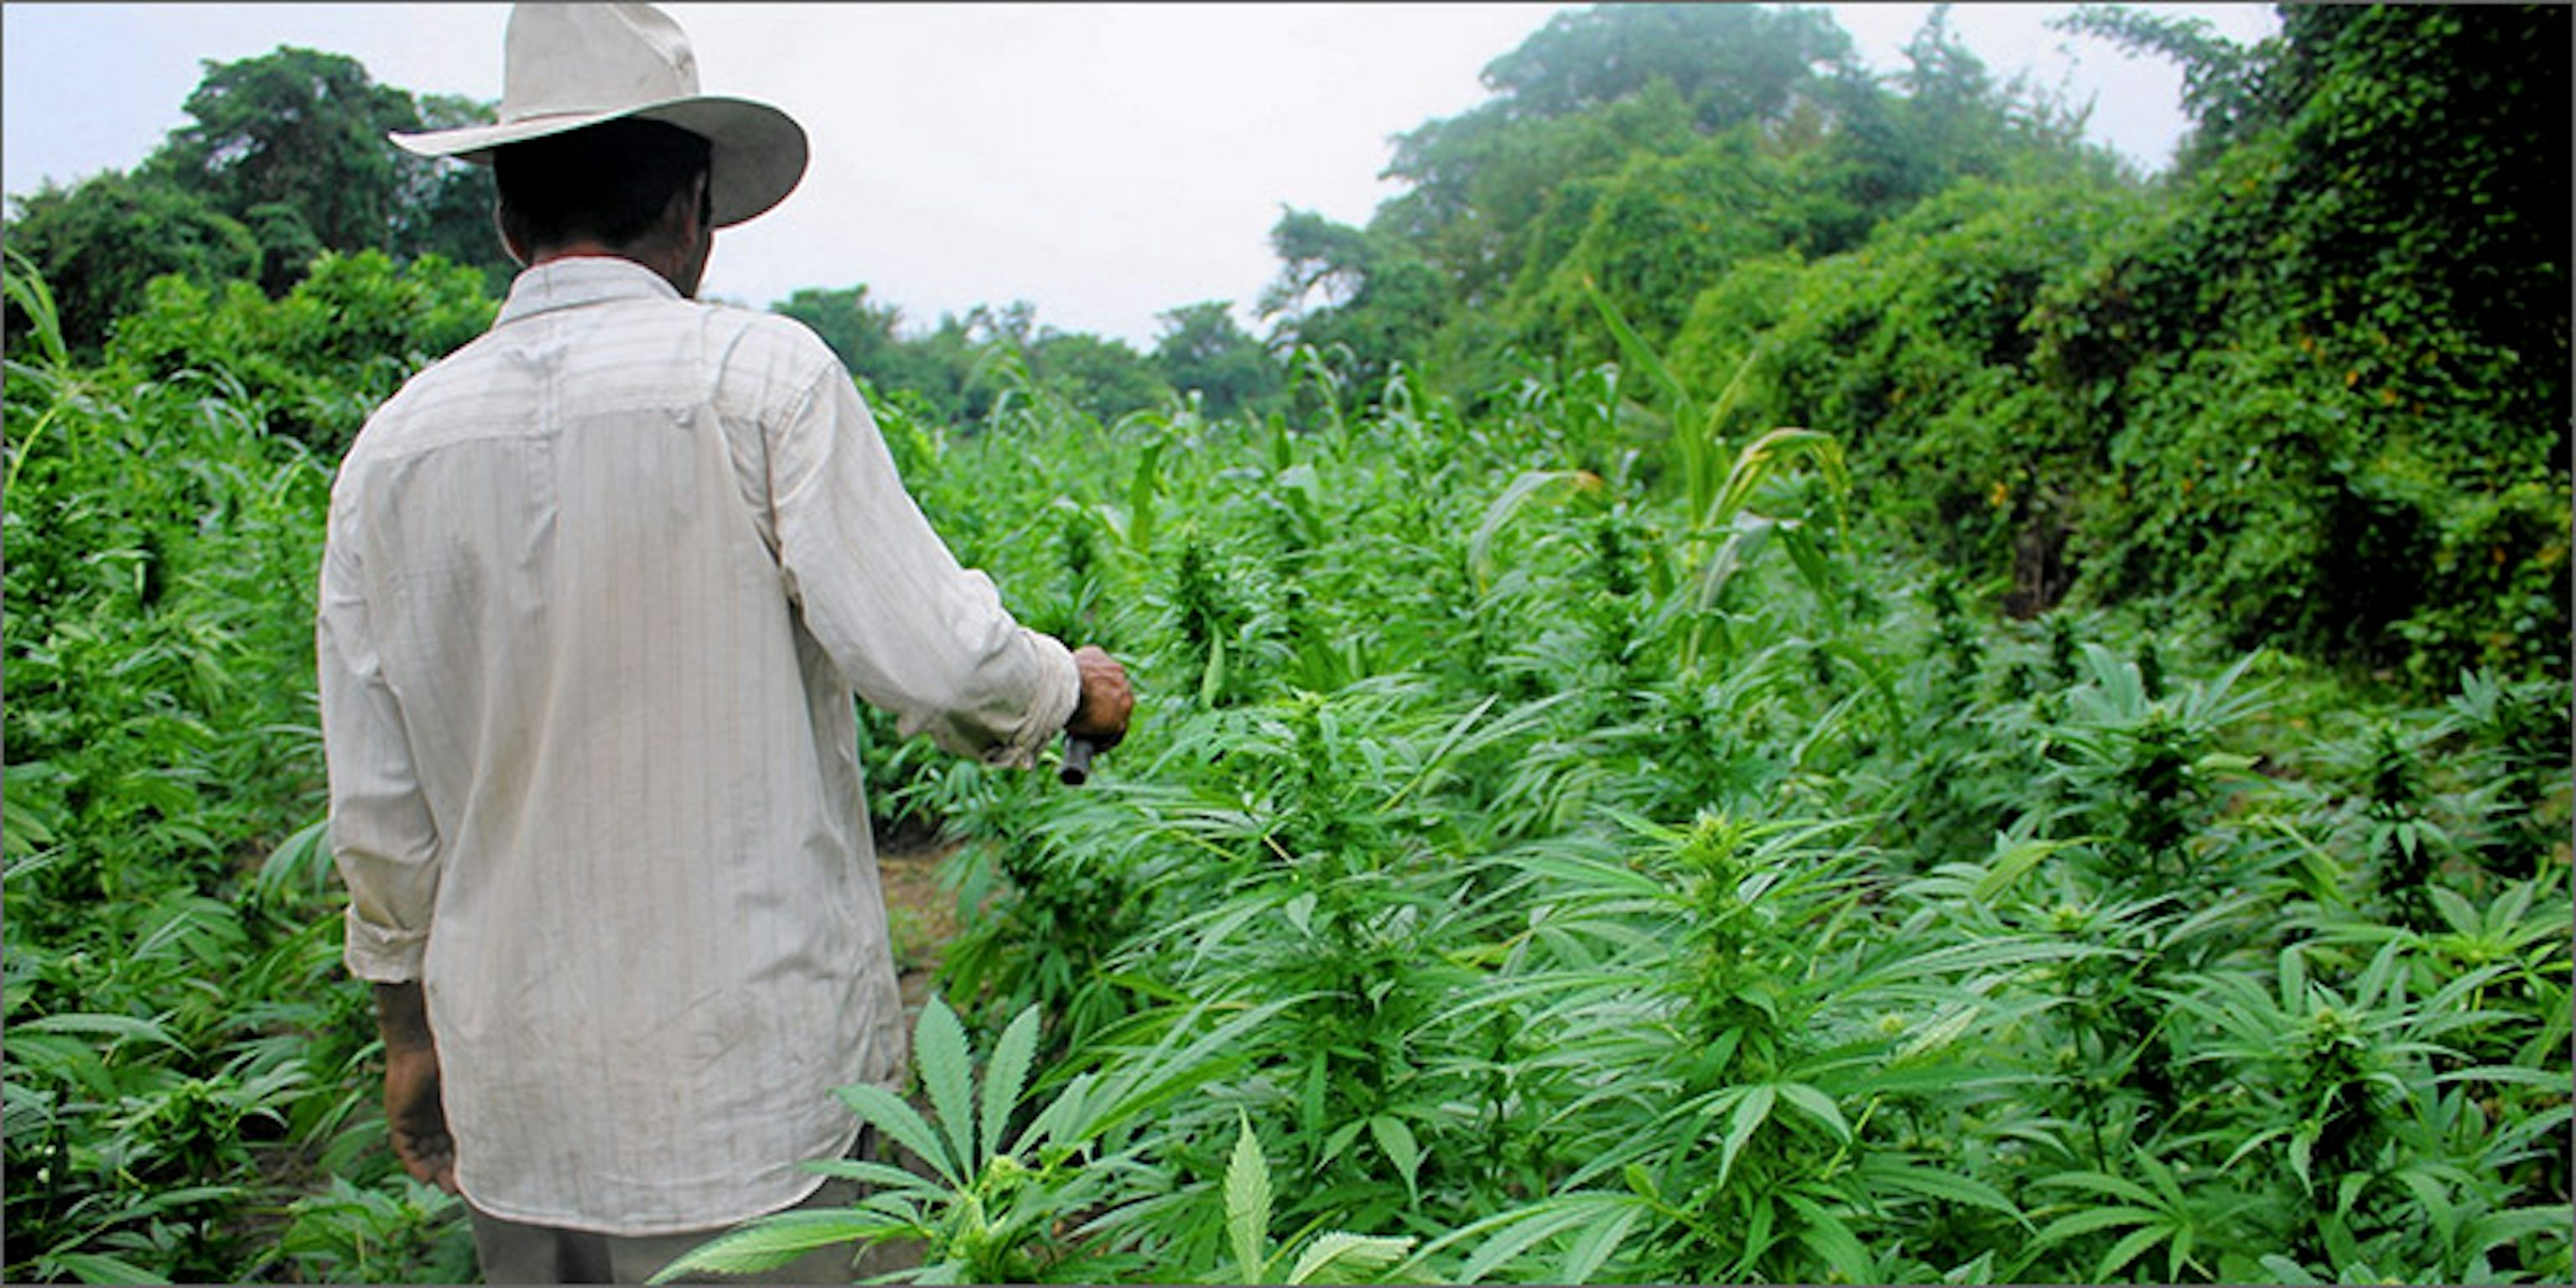 Legalize Cannabis, Cartels Stop Growing | Herb